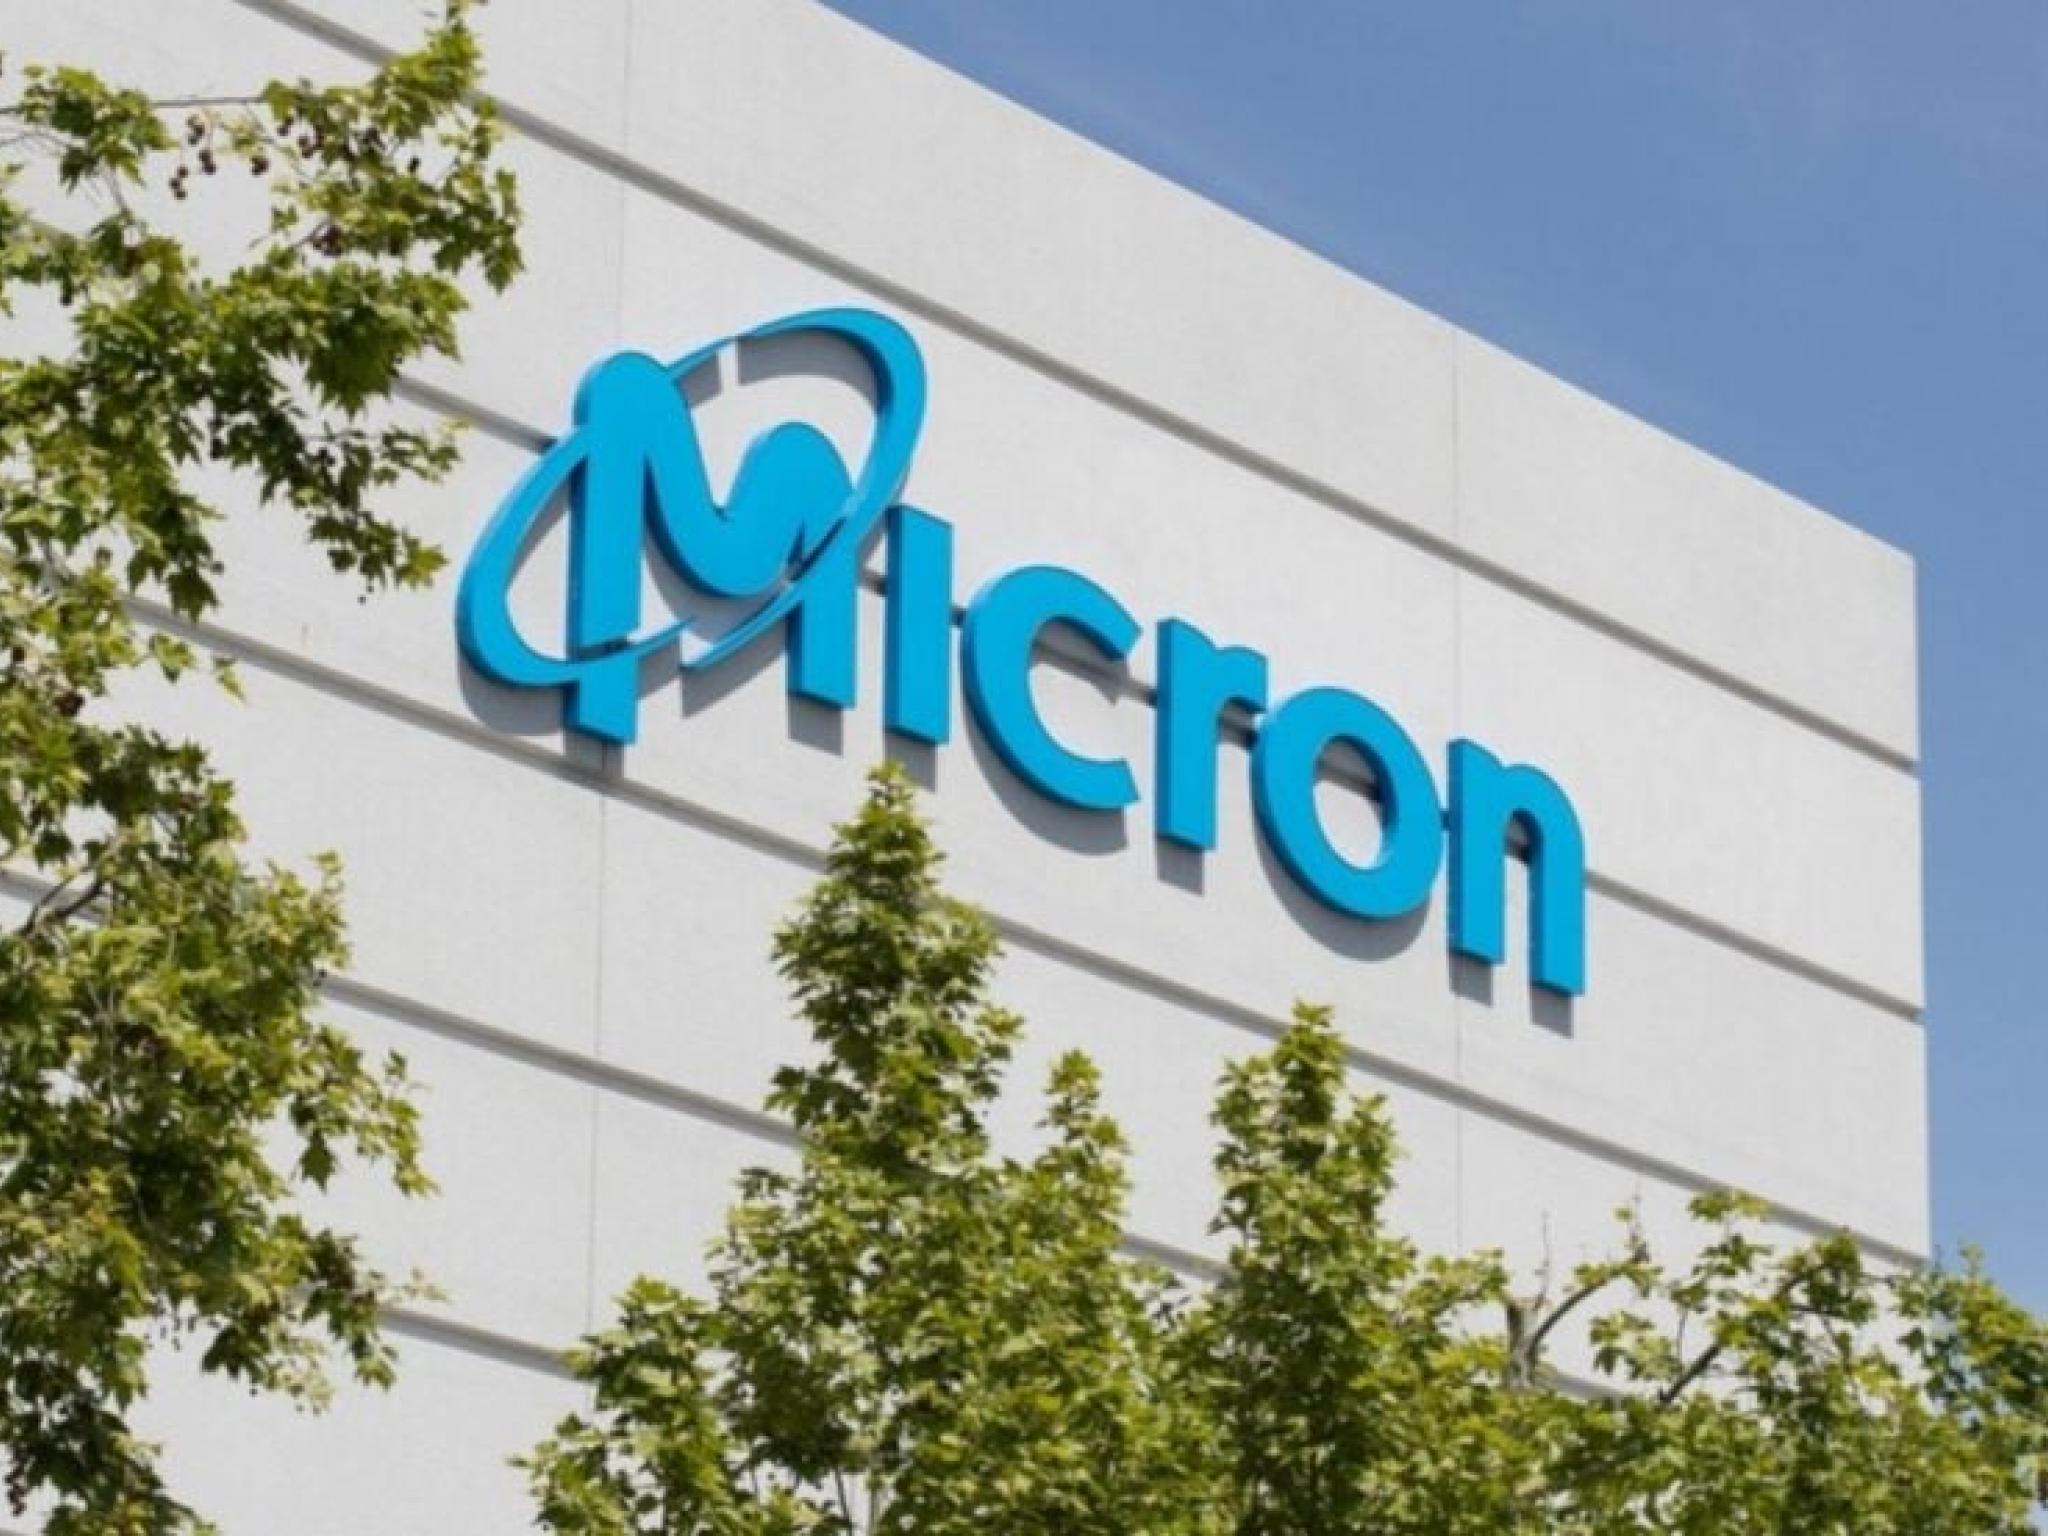  microns-q3-earnings-8-analysts-optimistic-about-ai-growth-predict-success-in-advanced-memory-technology 